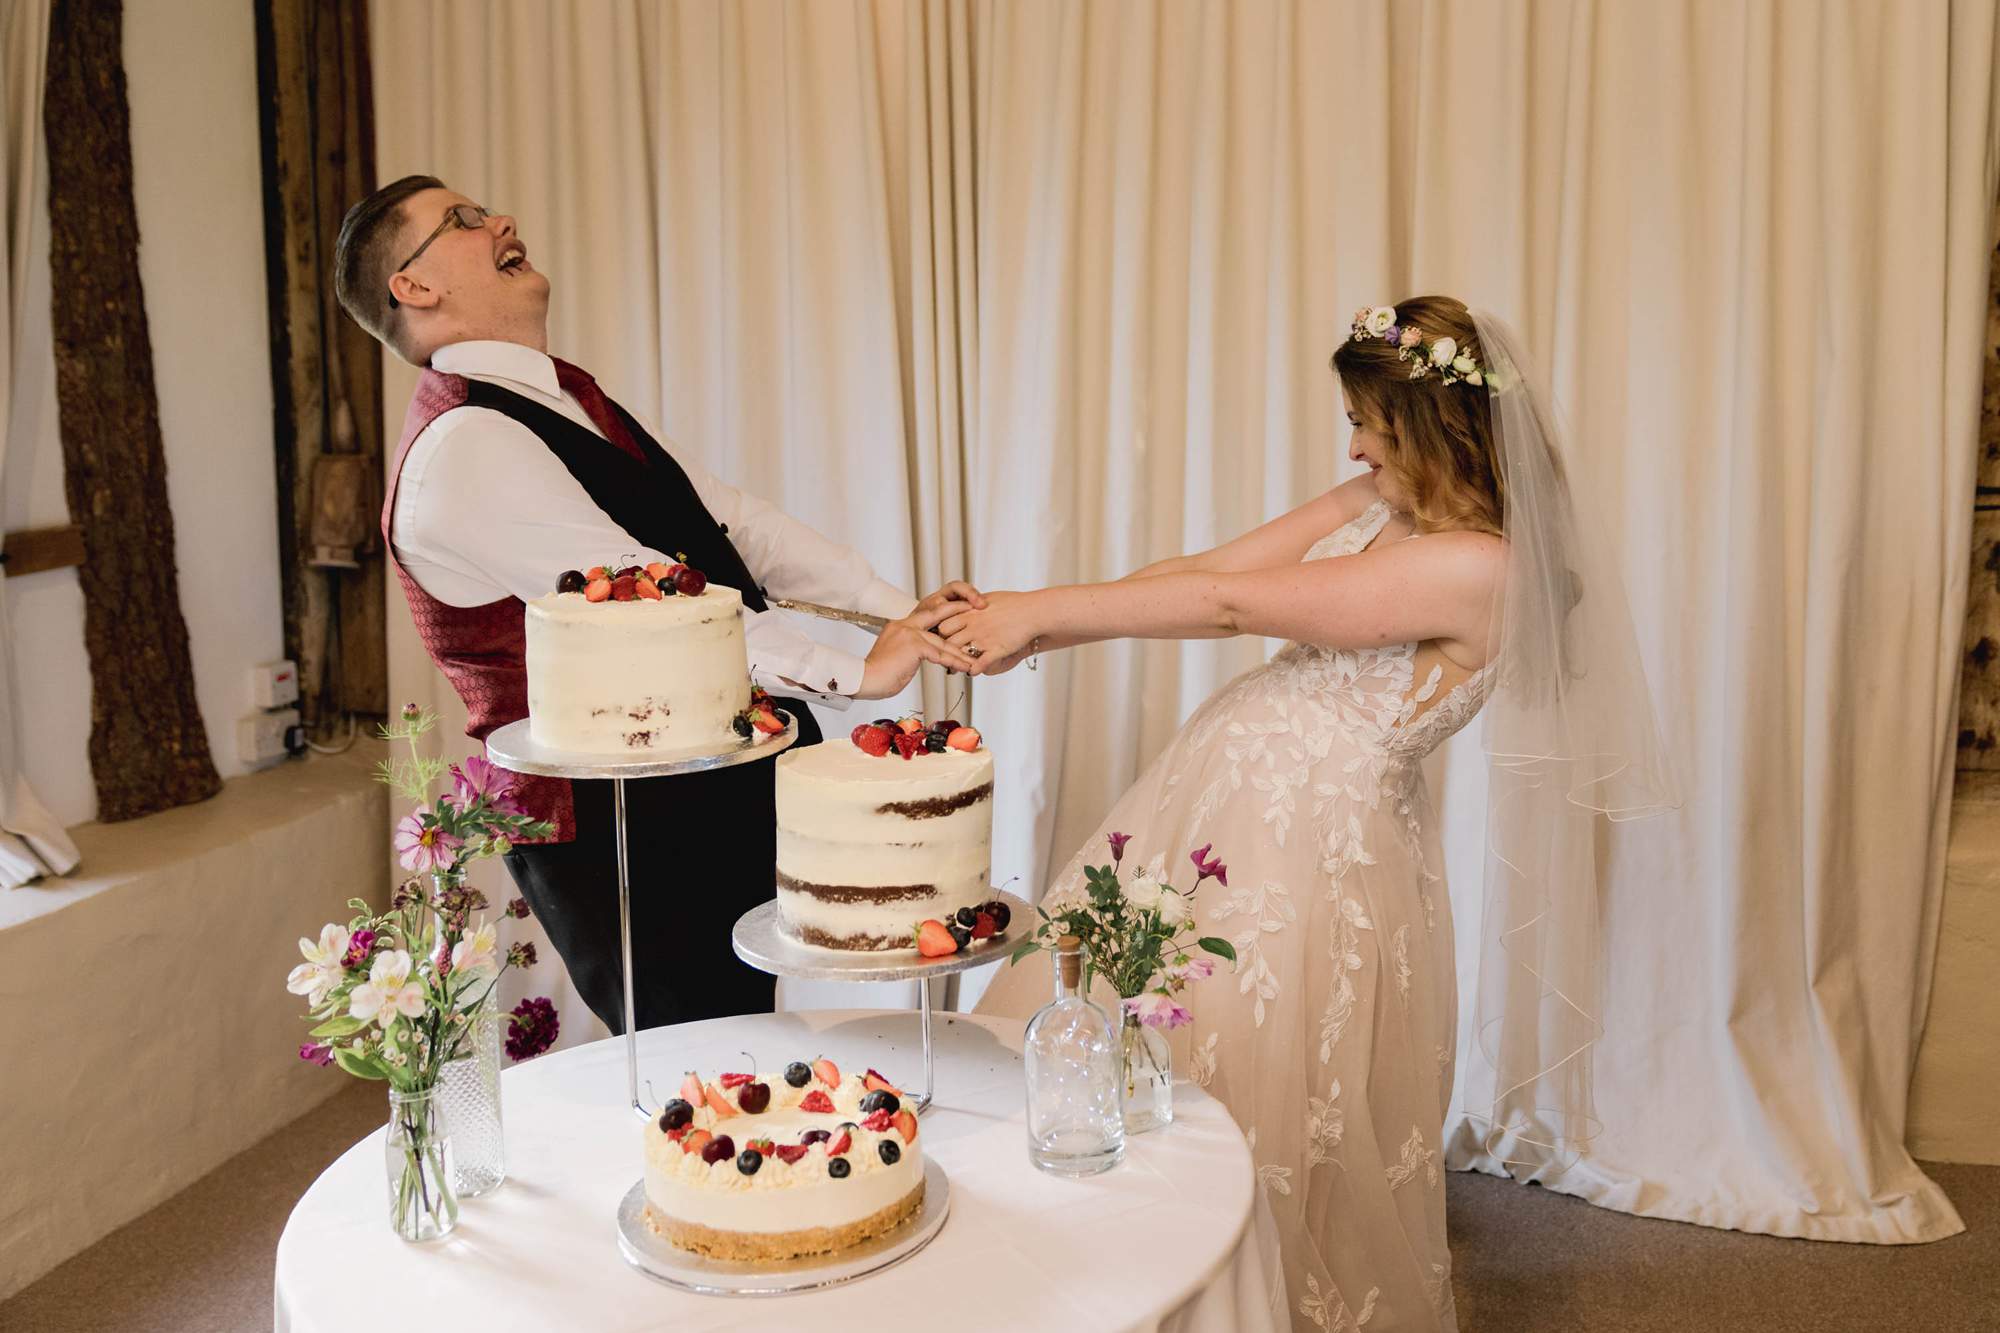 Bride and groom cut the cake on their wedding day at the Clock Barn in Hampshire.